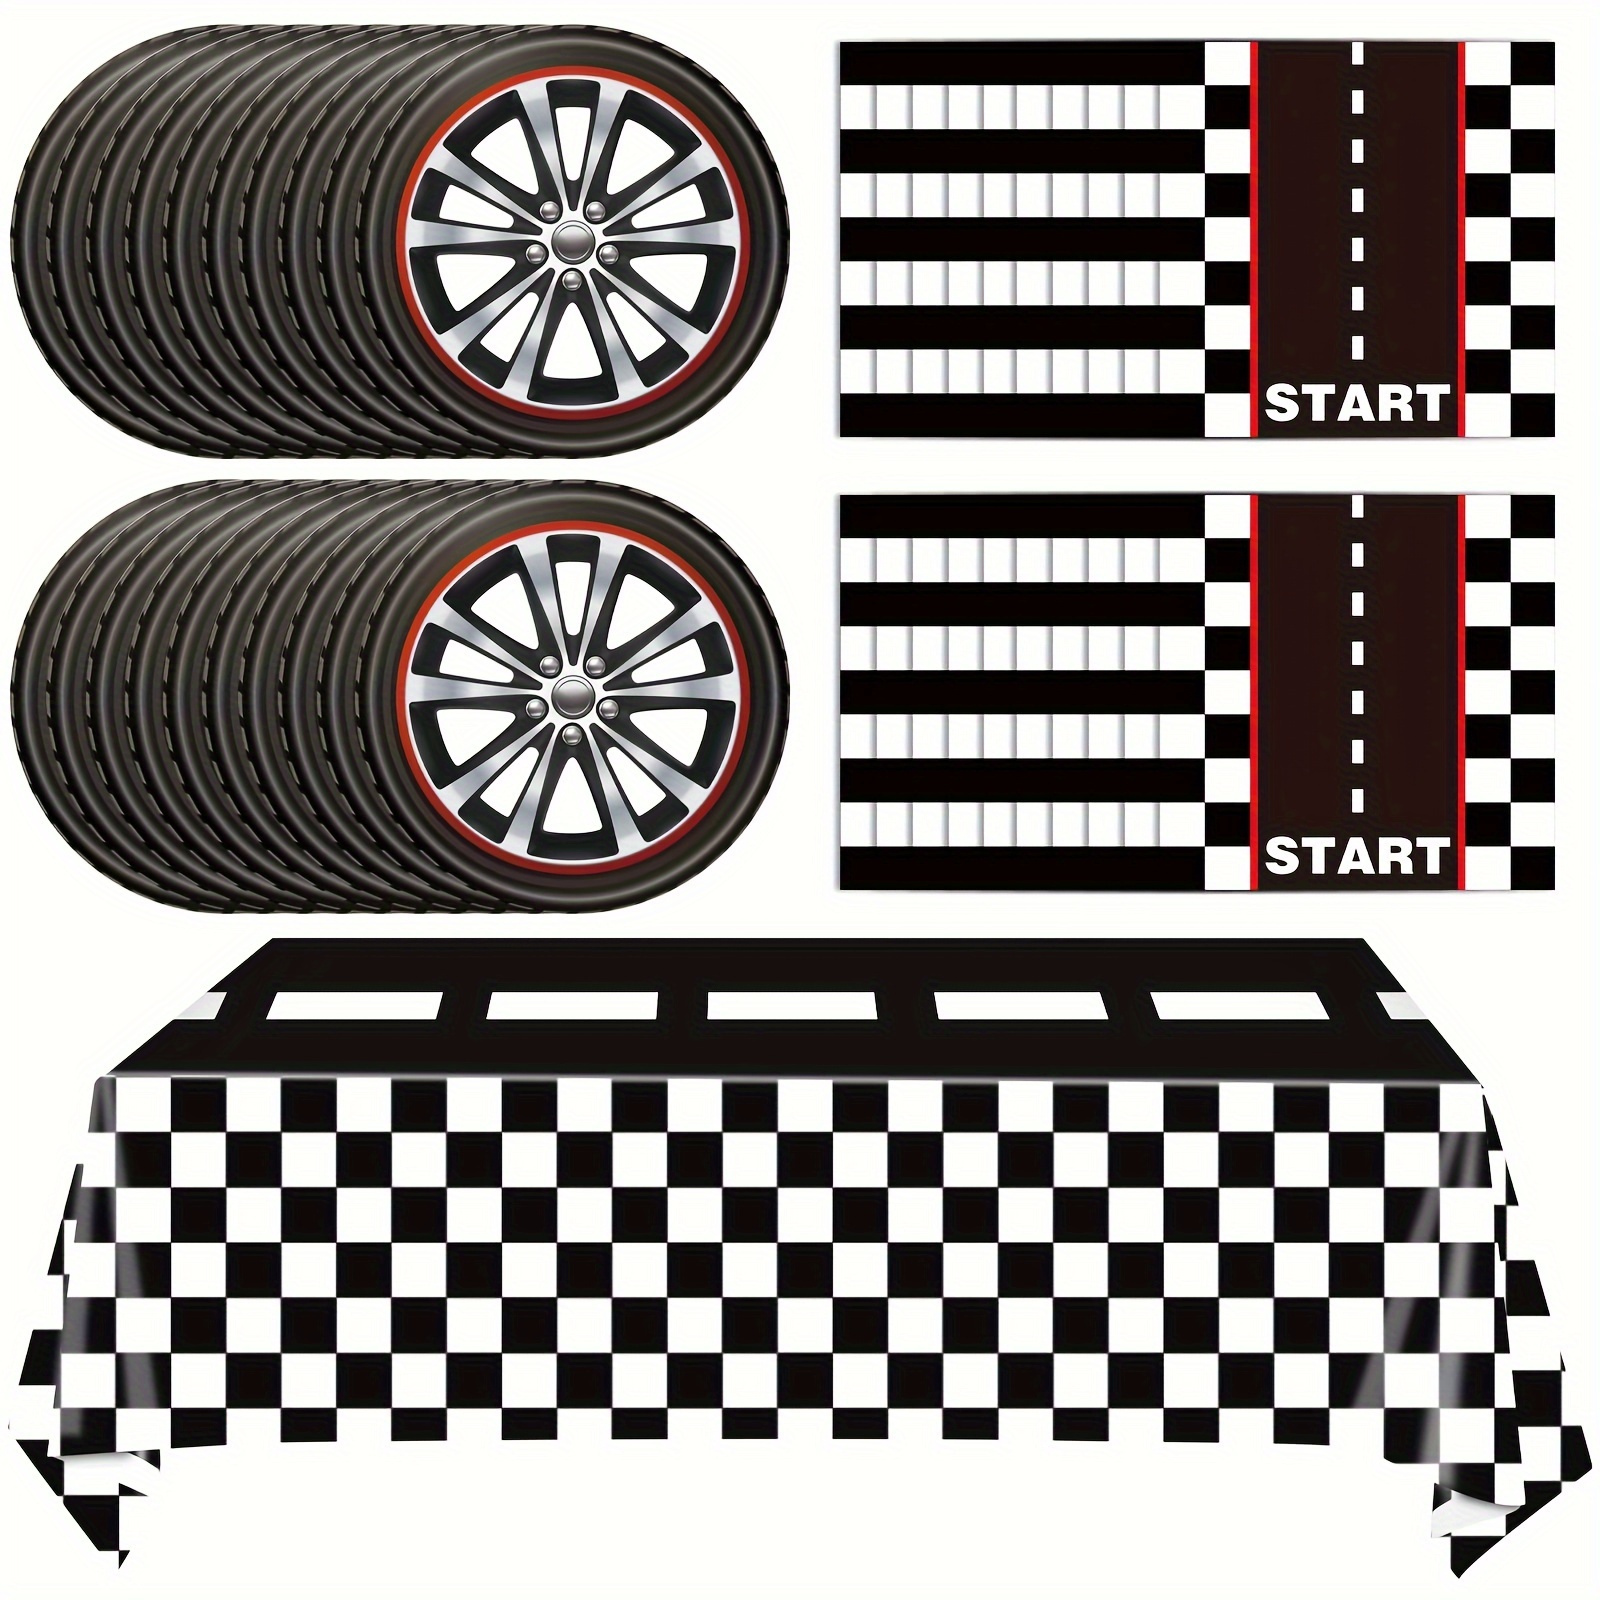 

41-piece Racing Car Party Supplies Set - Race Track Themed Disposable Dinnerware With Plates, Napkins, And Tablecloth - Perfect For Birthday, Sports Events, And Racing Party Decorations